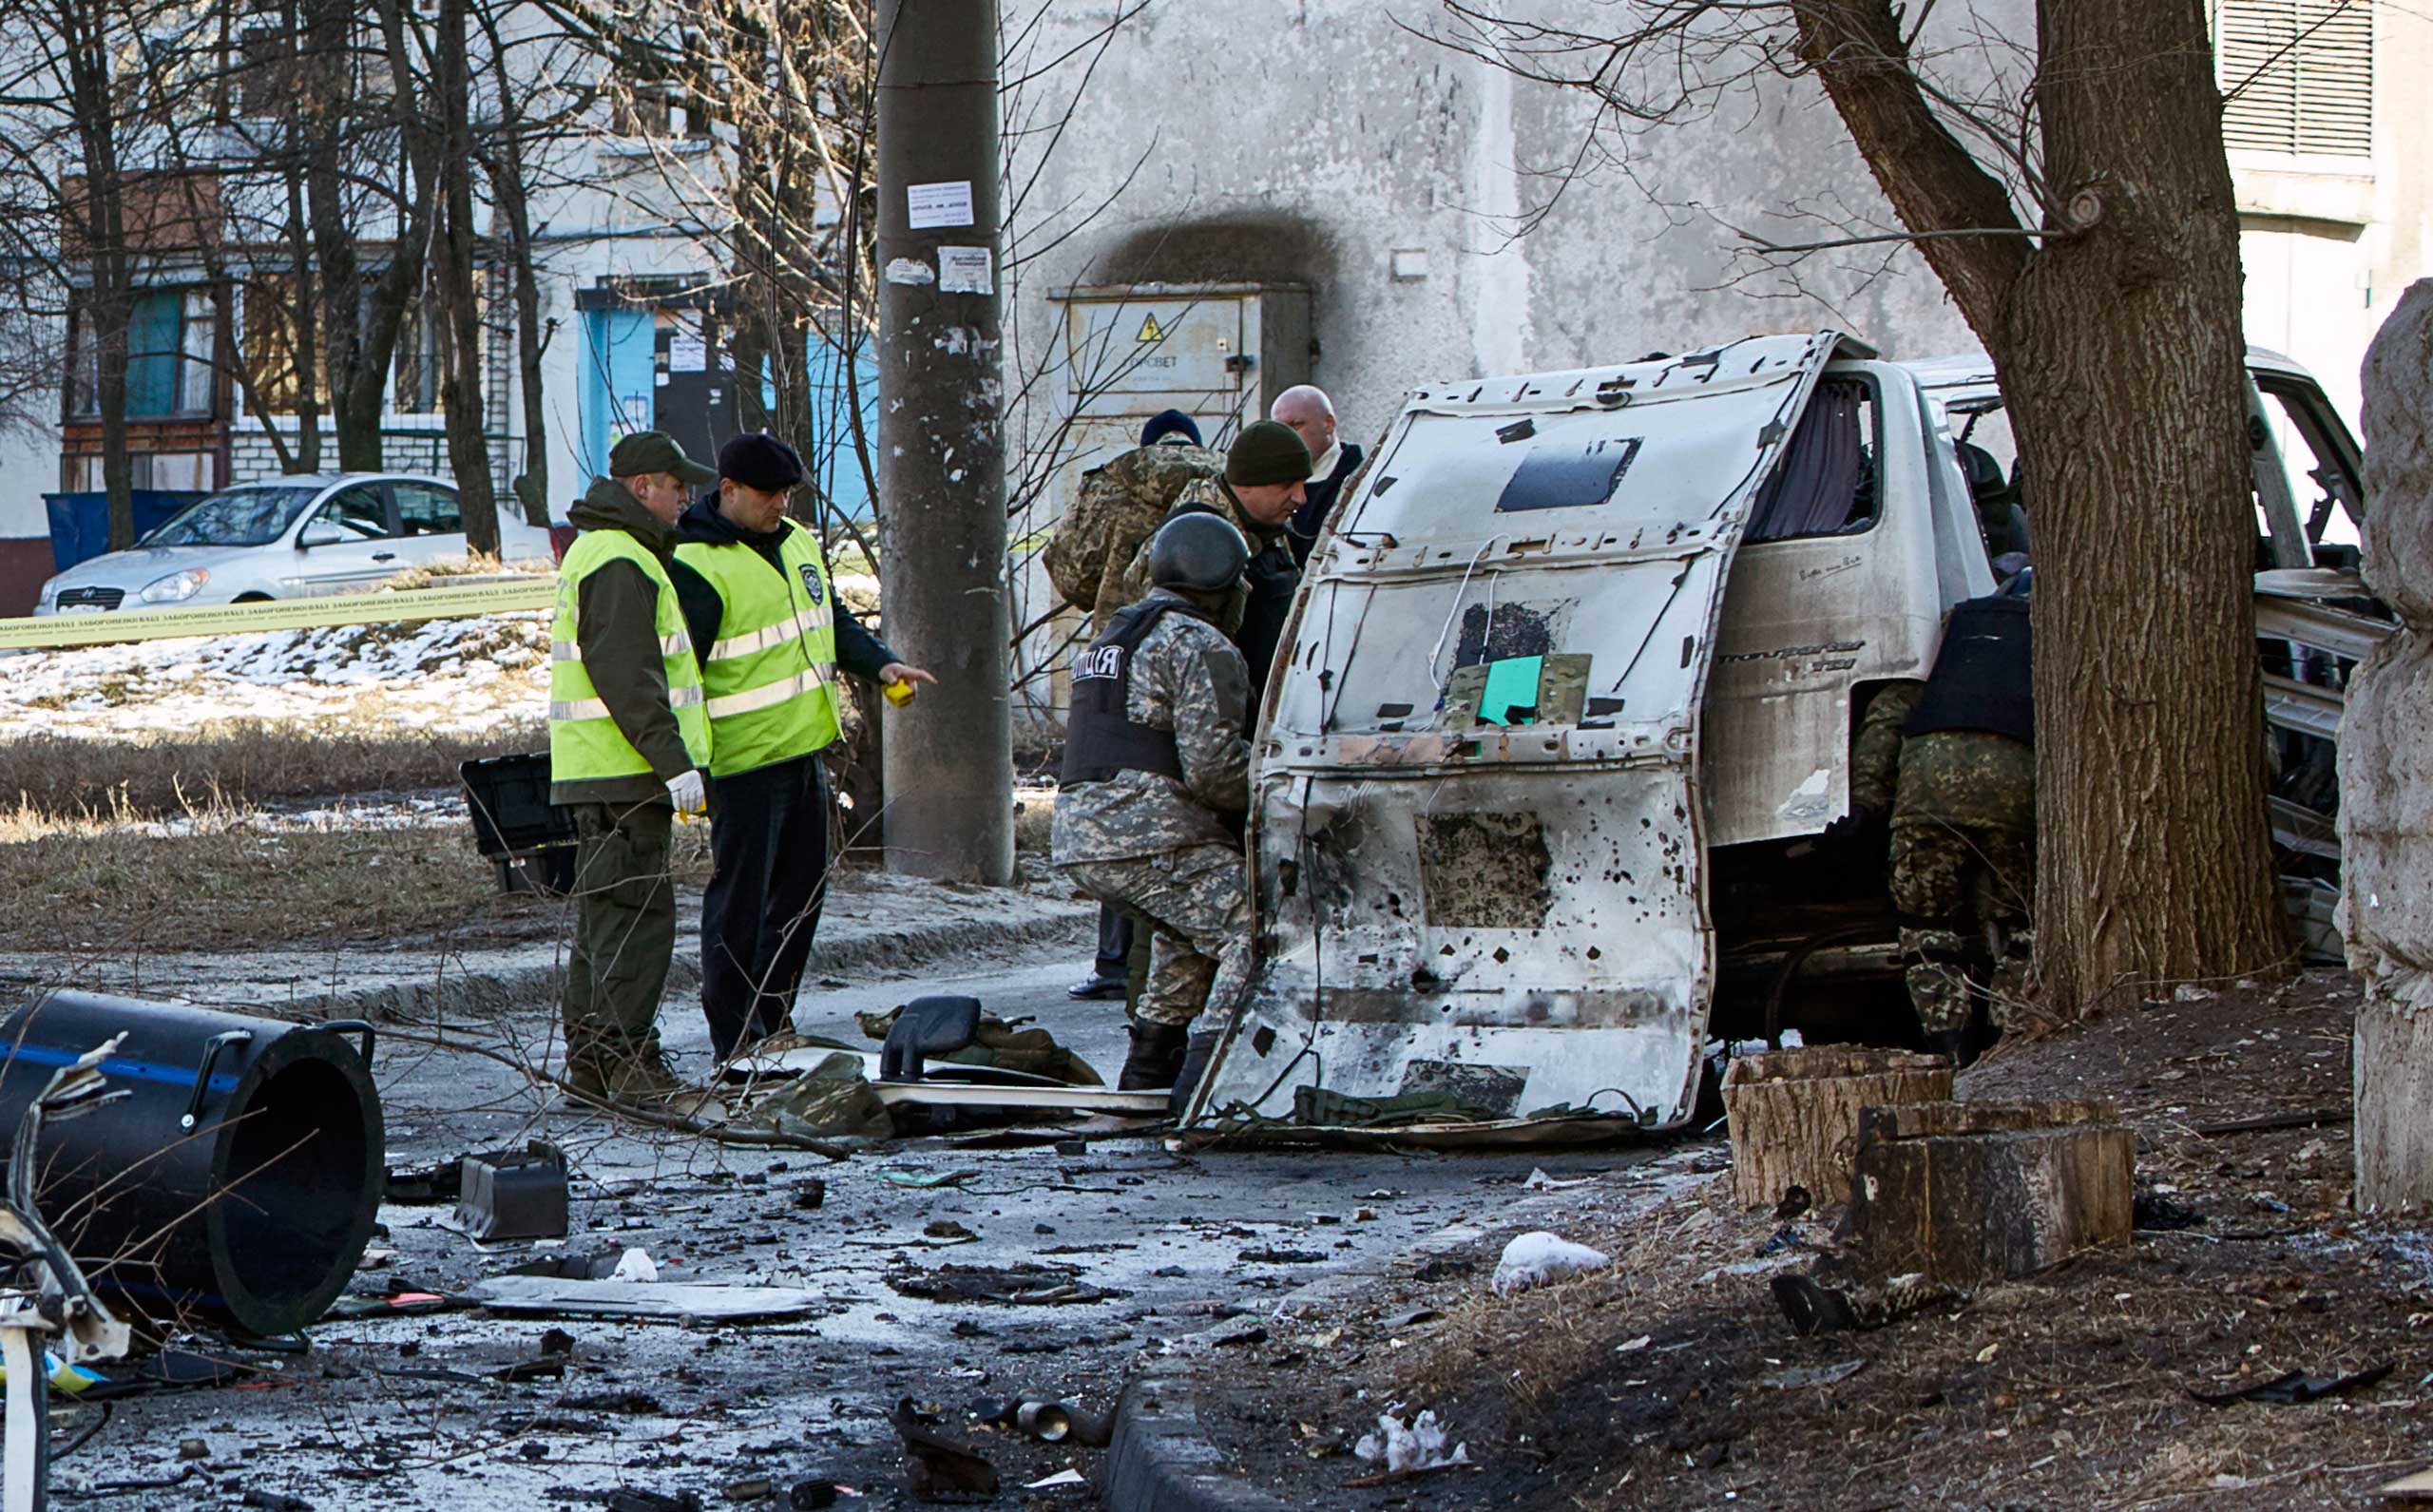 Ukrainian police and forensic experts examine the wreckage of a mini-bus after explosion, in Kharkov, March 6, 2015. (Sergei Kozlov—EPA)